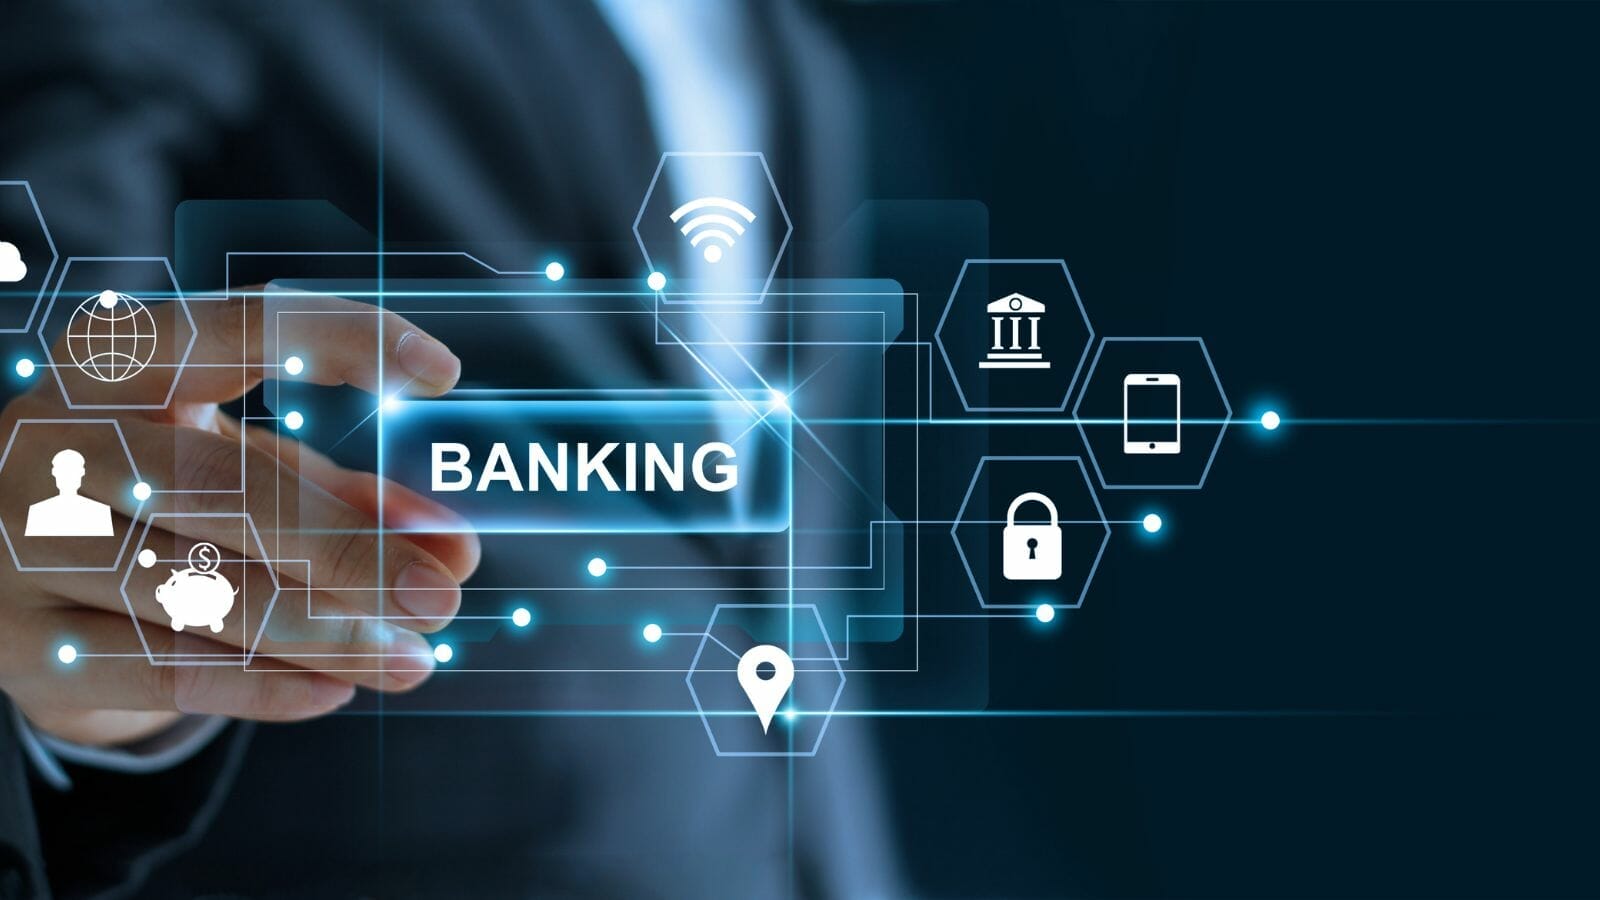 A hand touching a screen with icons saying banking

